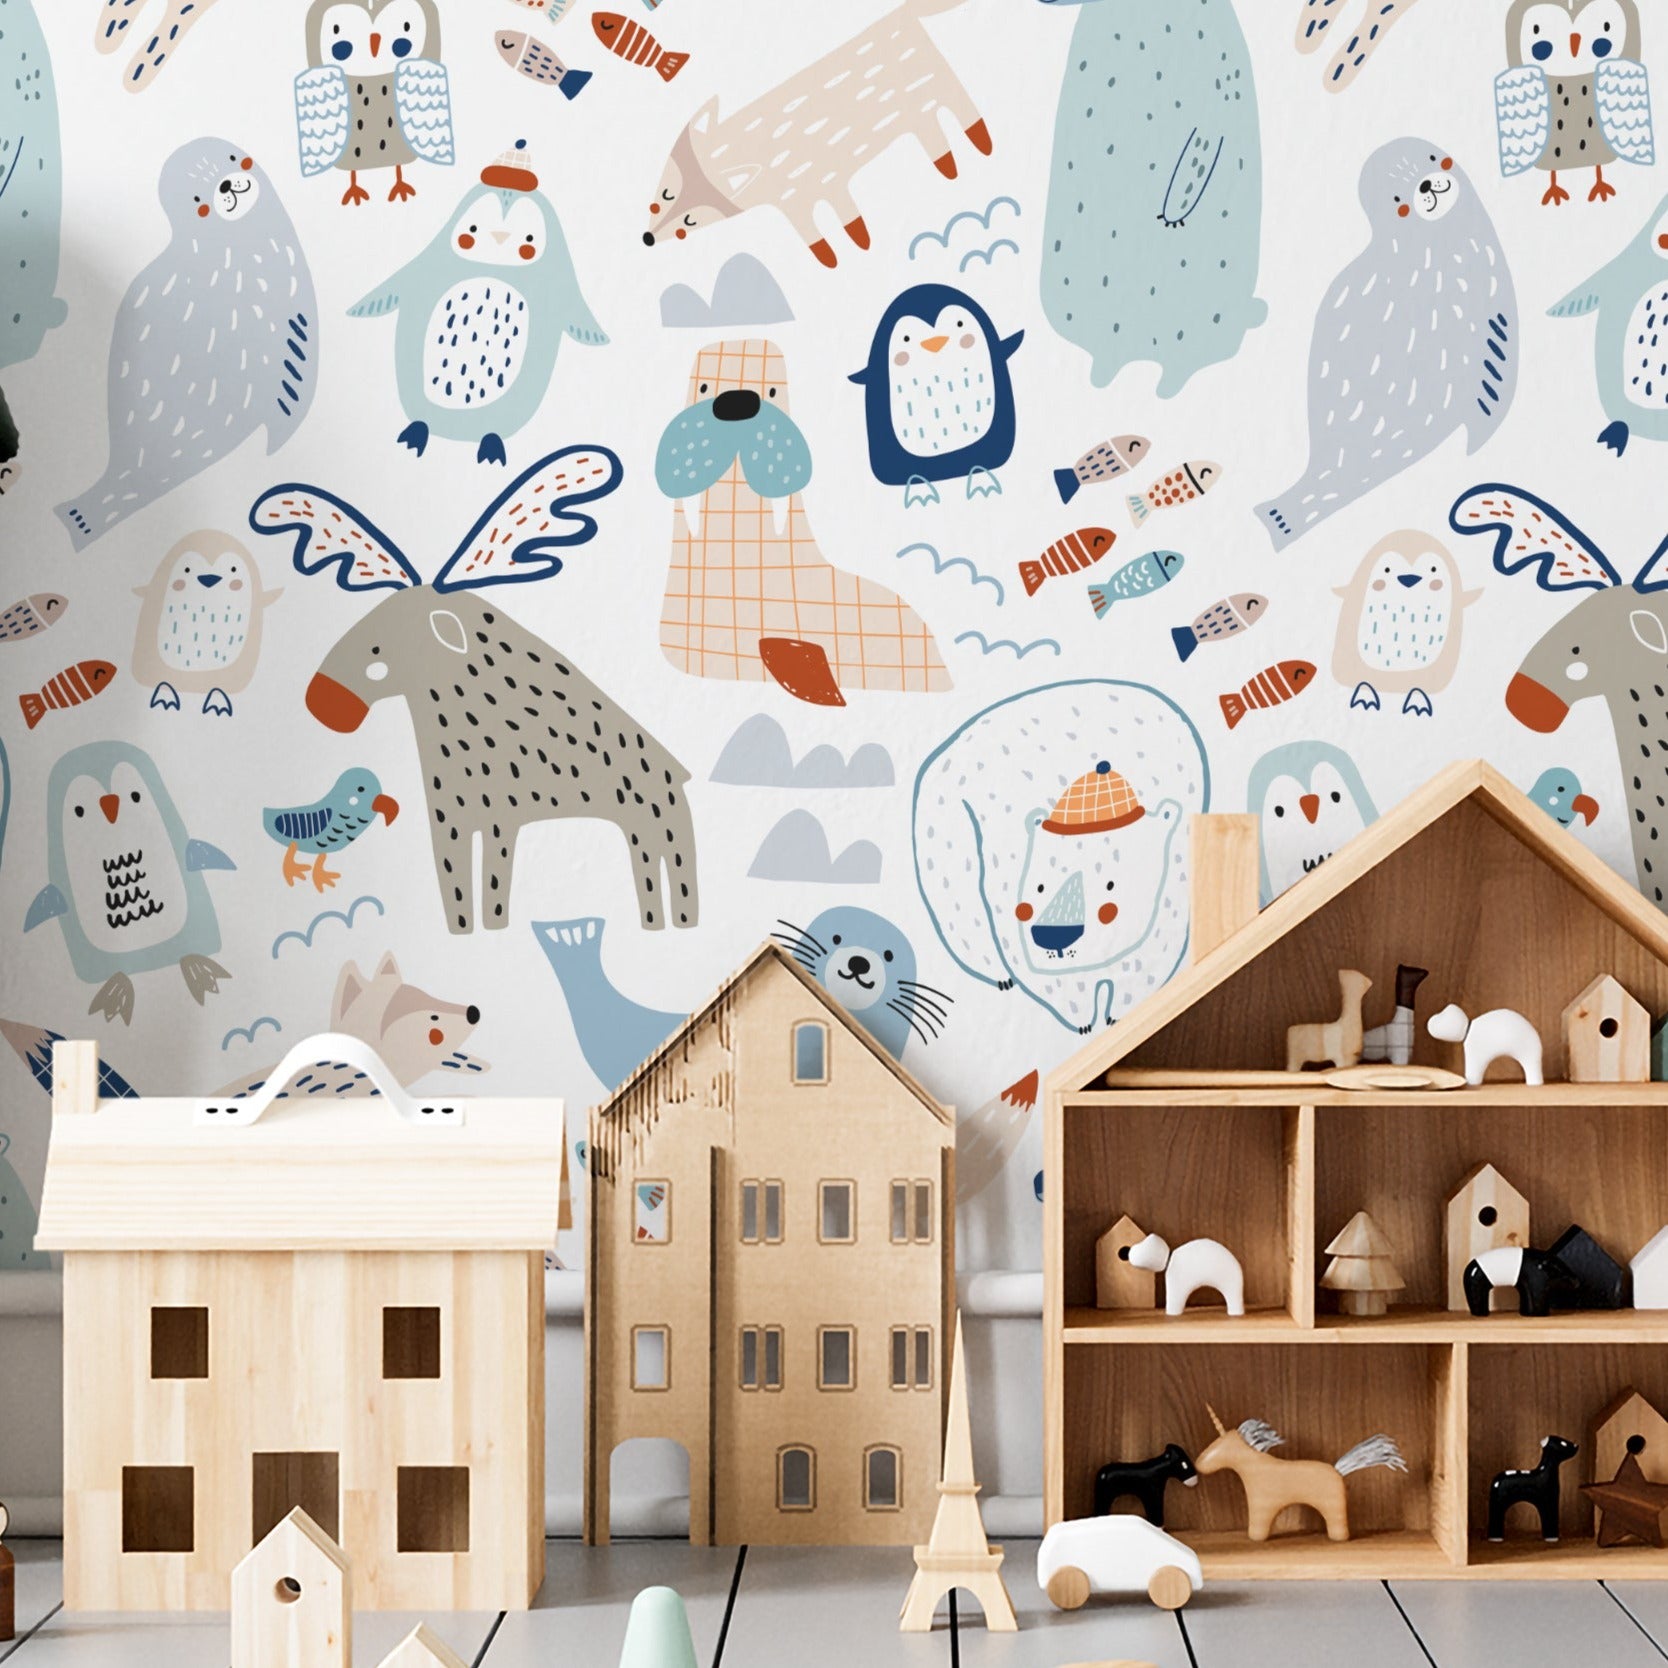 A nursery room decorated with "Nordic Moose Wallpaper" showing a vibrant and playful animal pattern. The room includes a white bookshelf filled with children's books and toys, a wooden playhouse, and a toy car track, all complemented by the cheerful wall design.